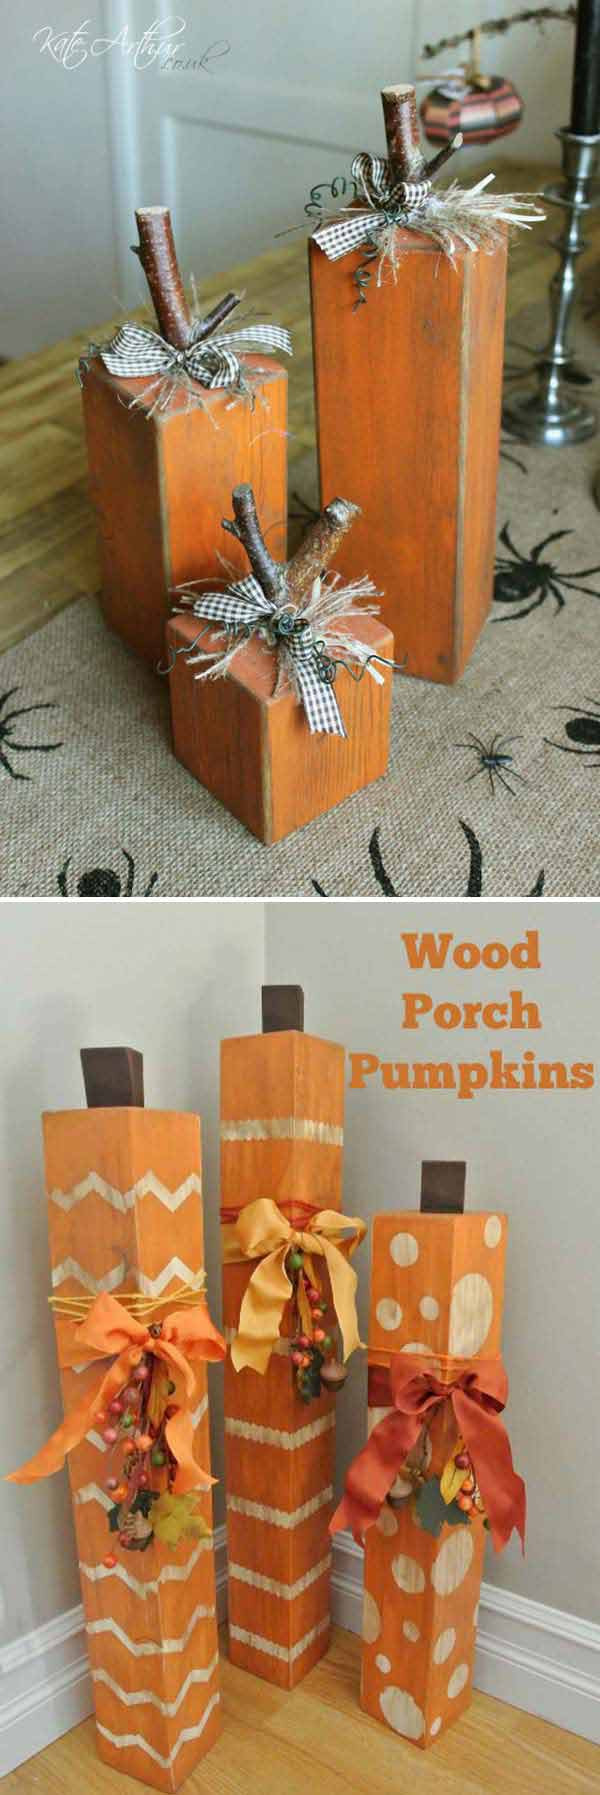 Fall Craft Decor
 20 Halloween Decorations Crafted from Reclaimed Wood